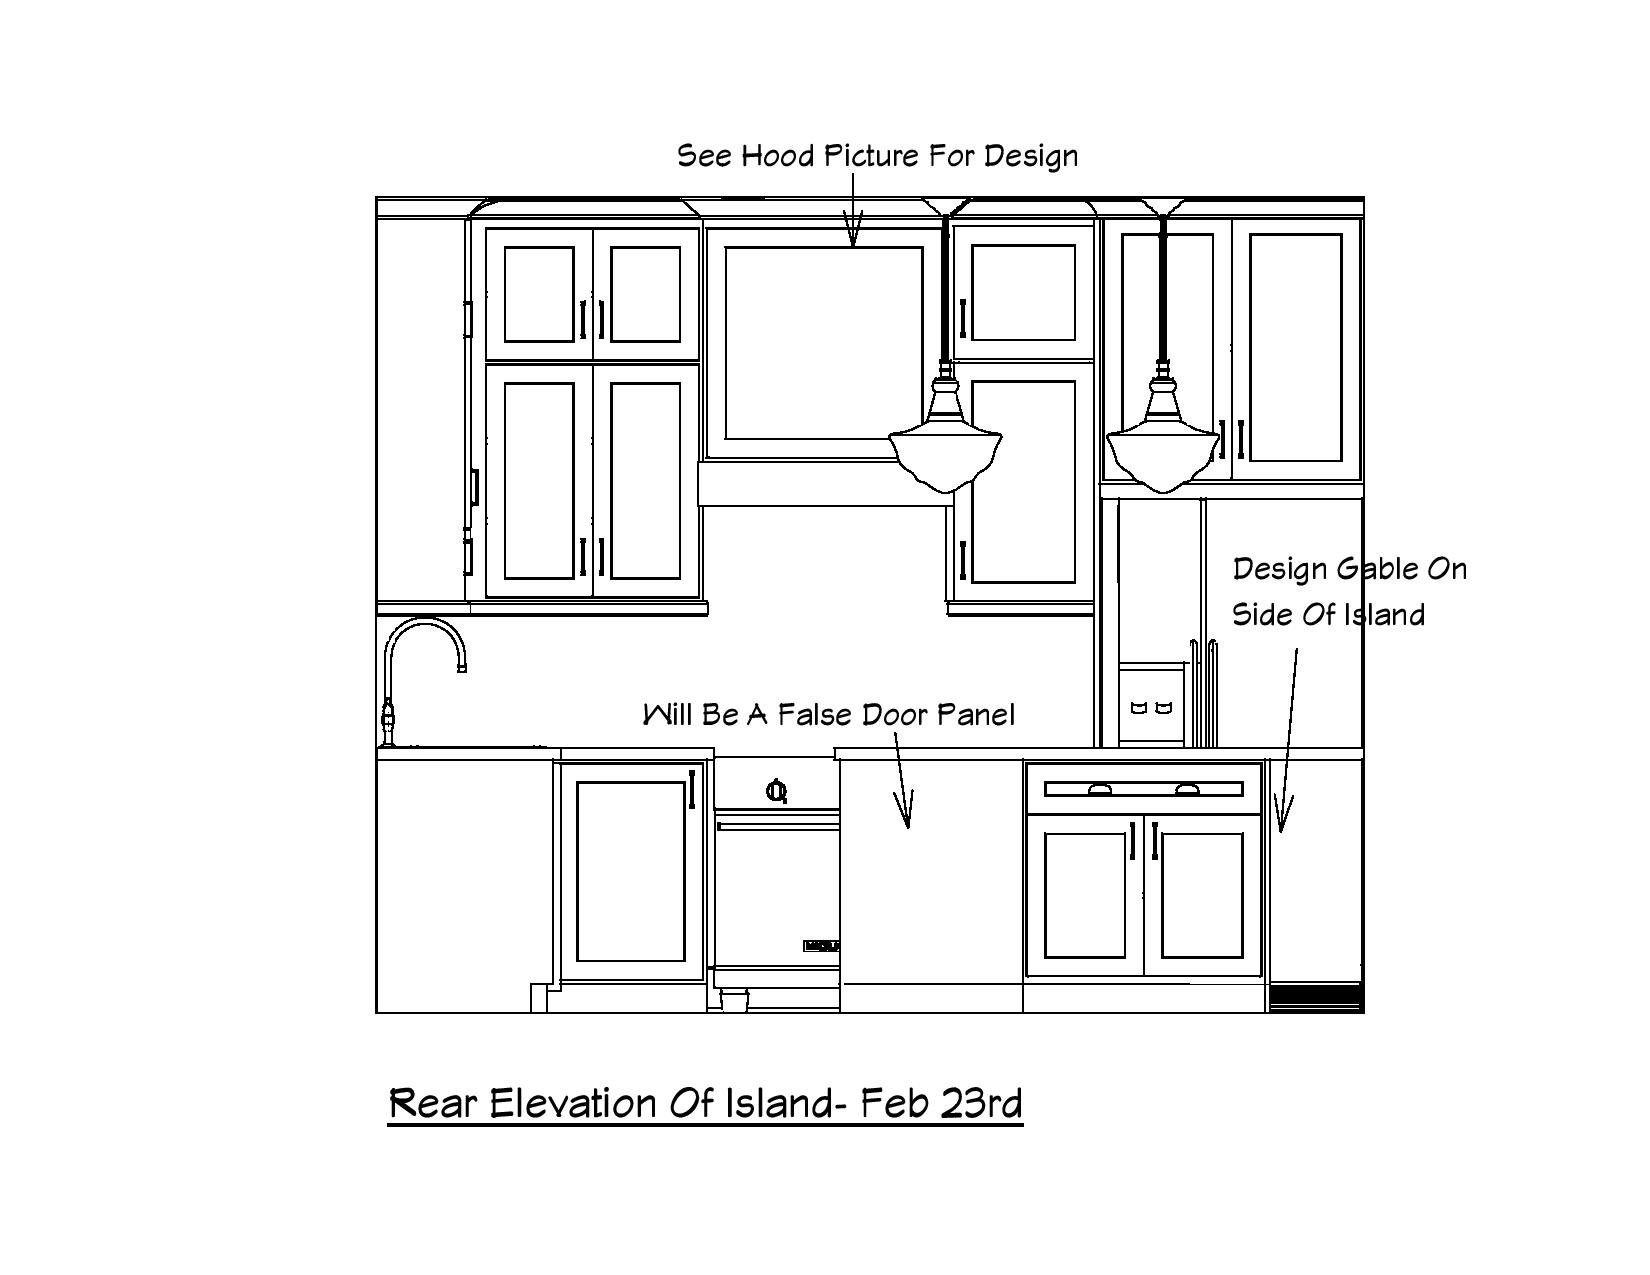 Brankston Elevation Rear Of Island And Stove Wall-page-001.jpg